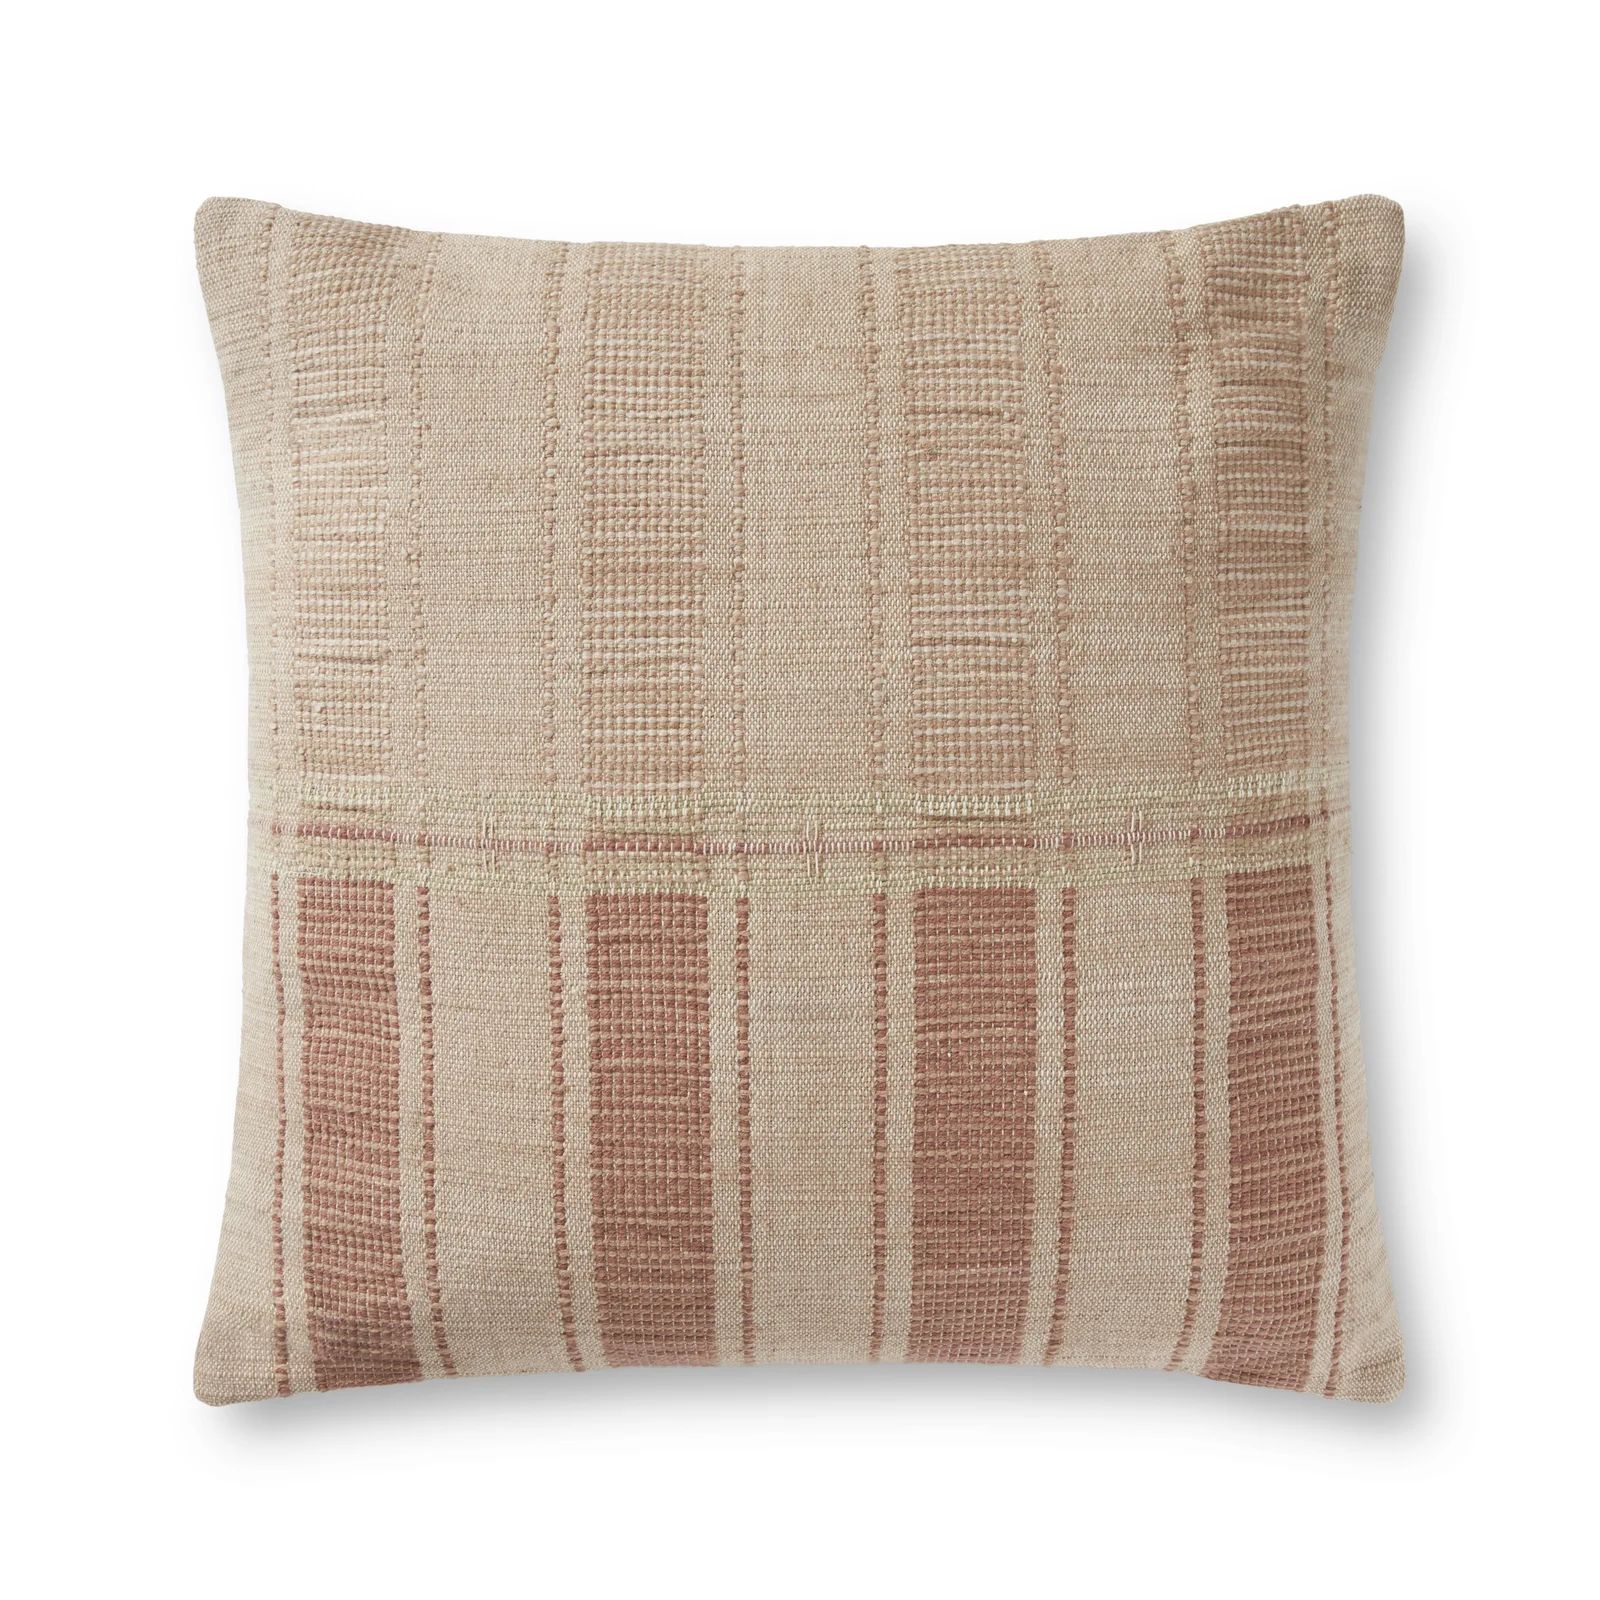 Marin Square Pillow Cover and Insert | Wayfair North America